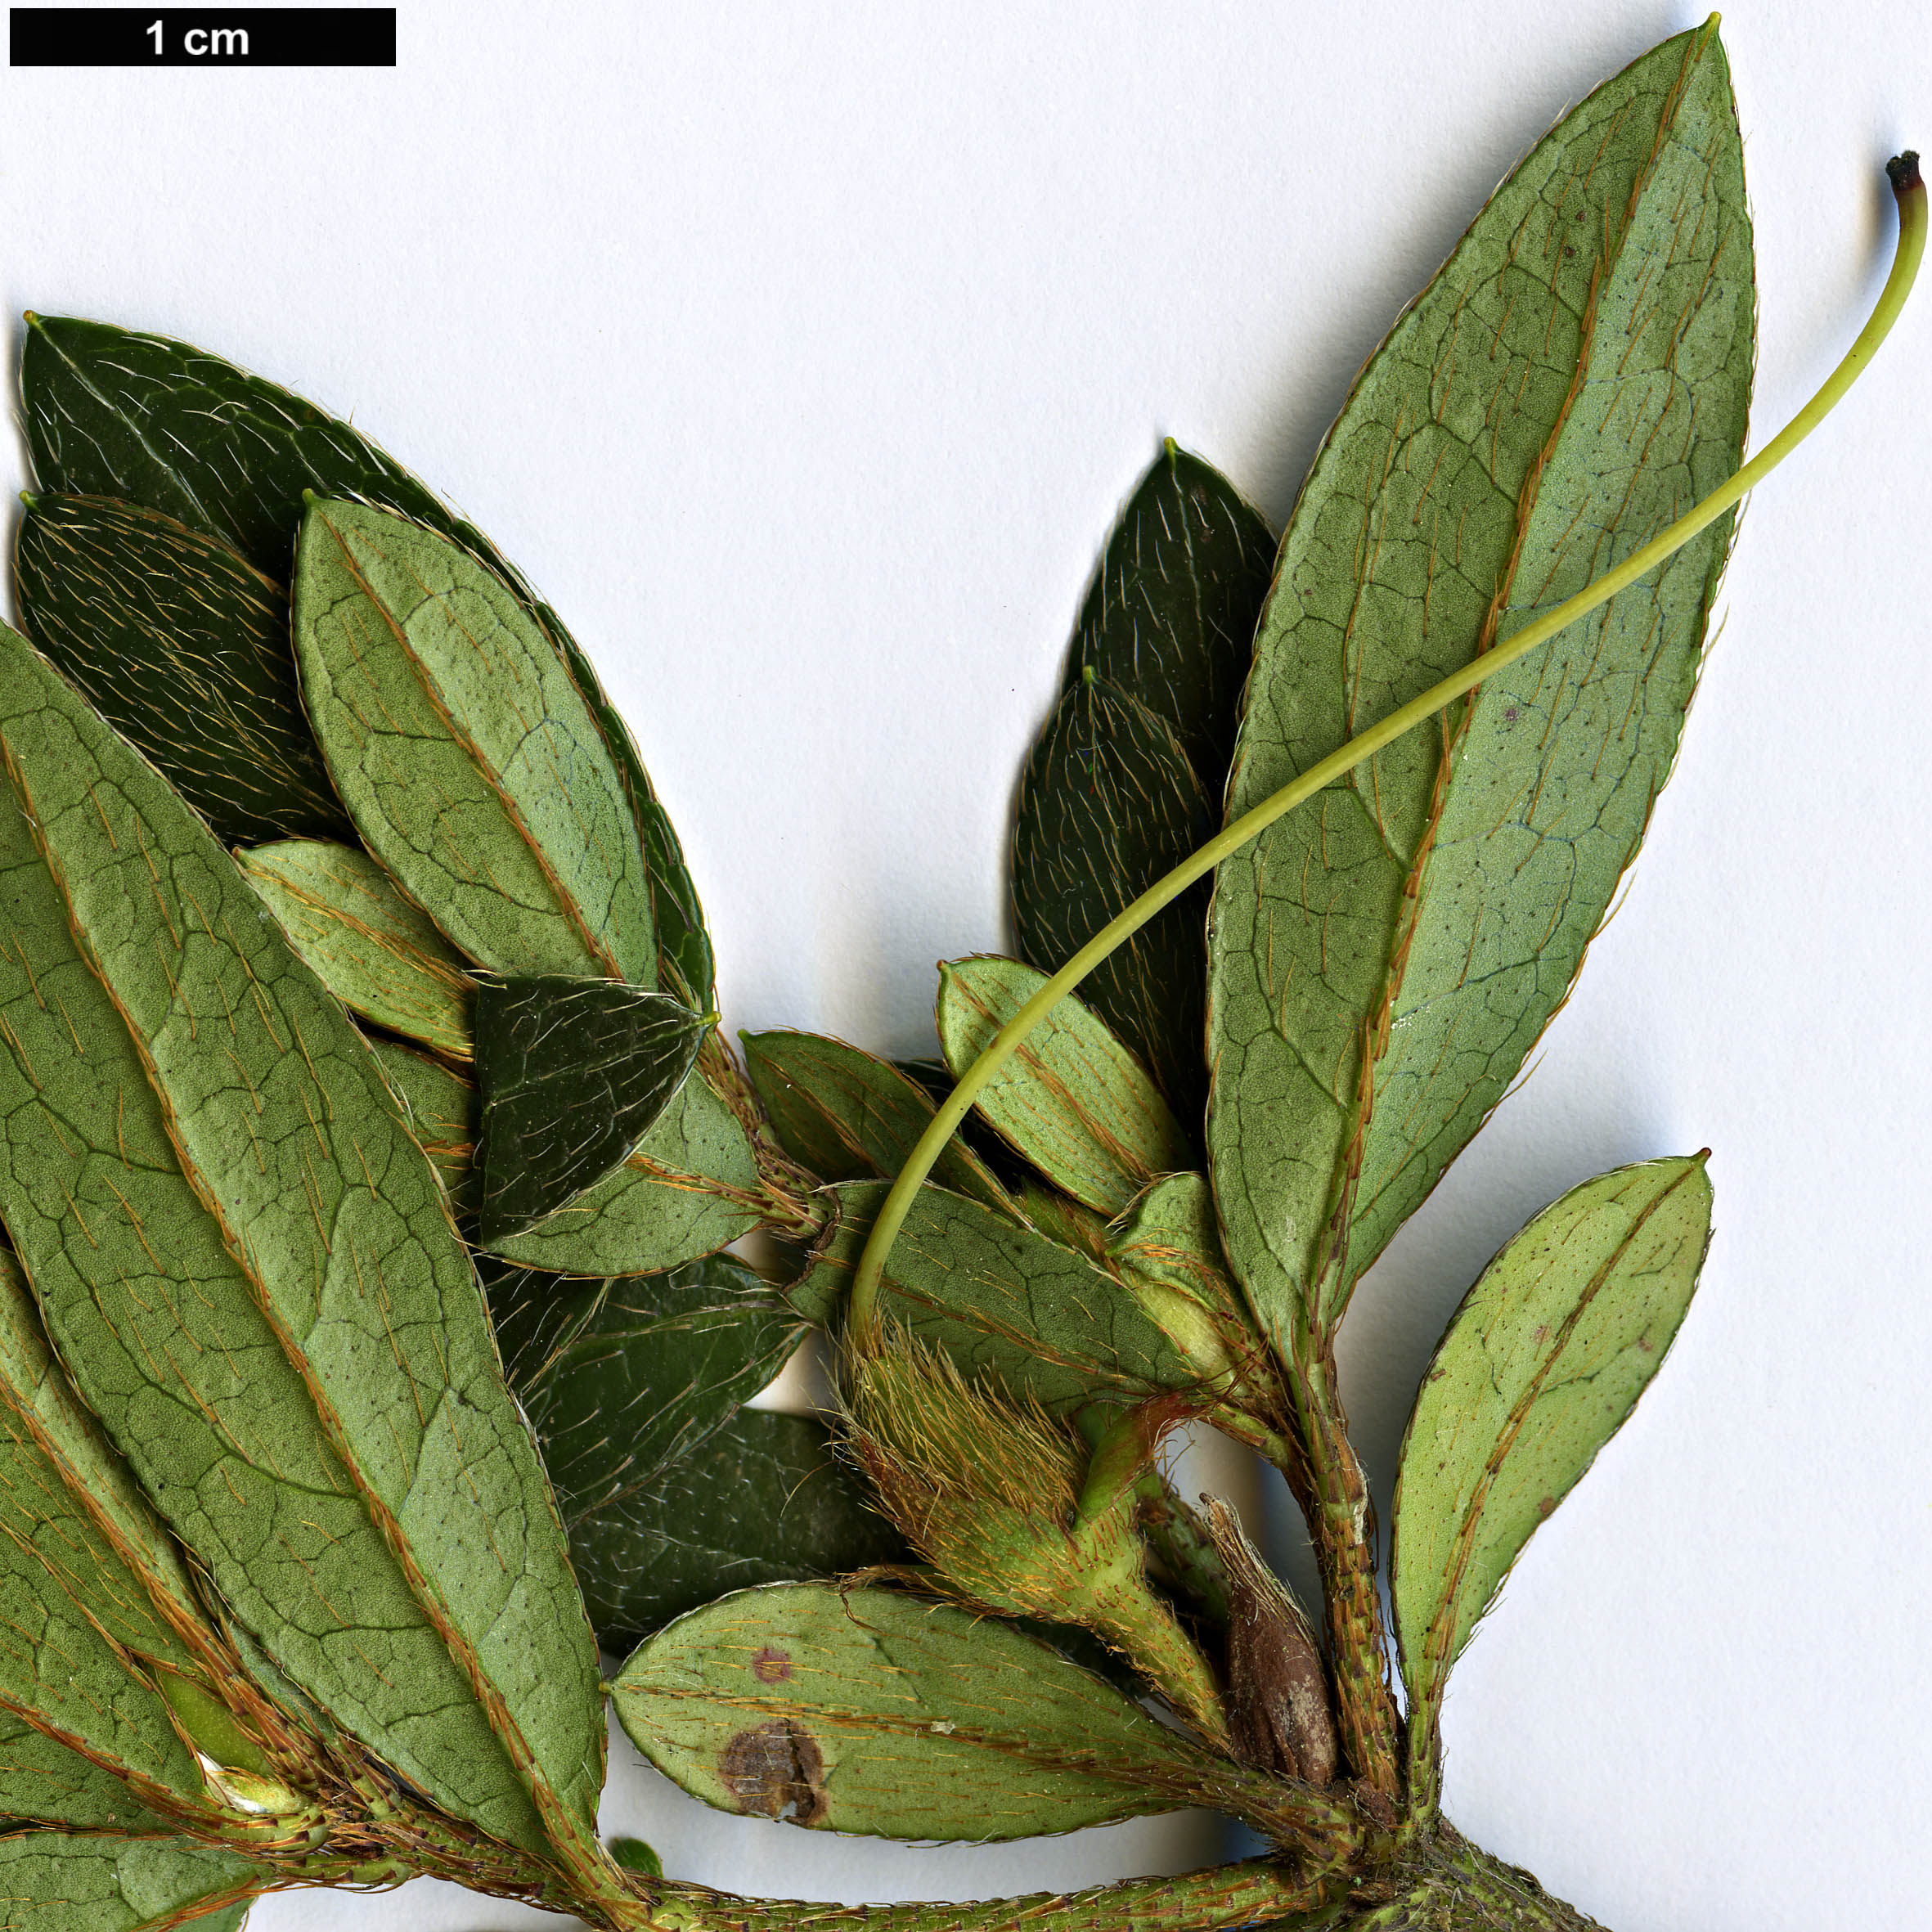 High resolution image: Family: Ericaceae - Genus: Rhododendron - Taxon: nakaharae